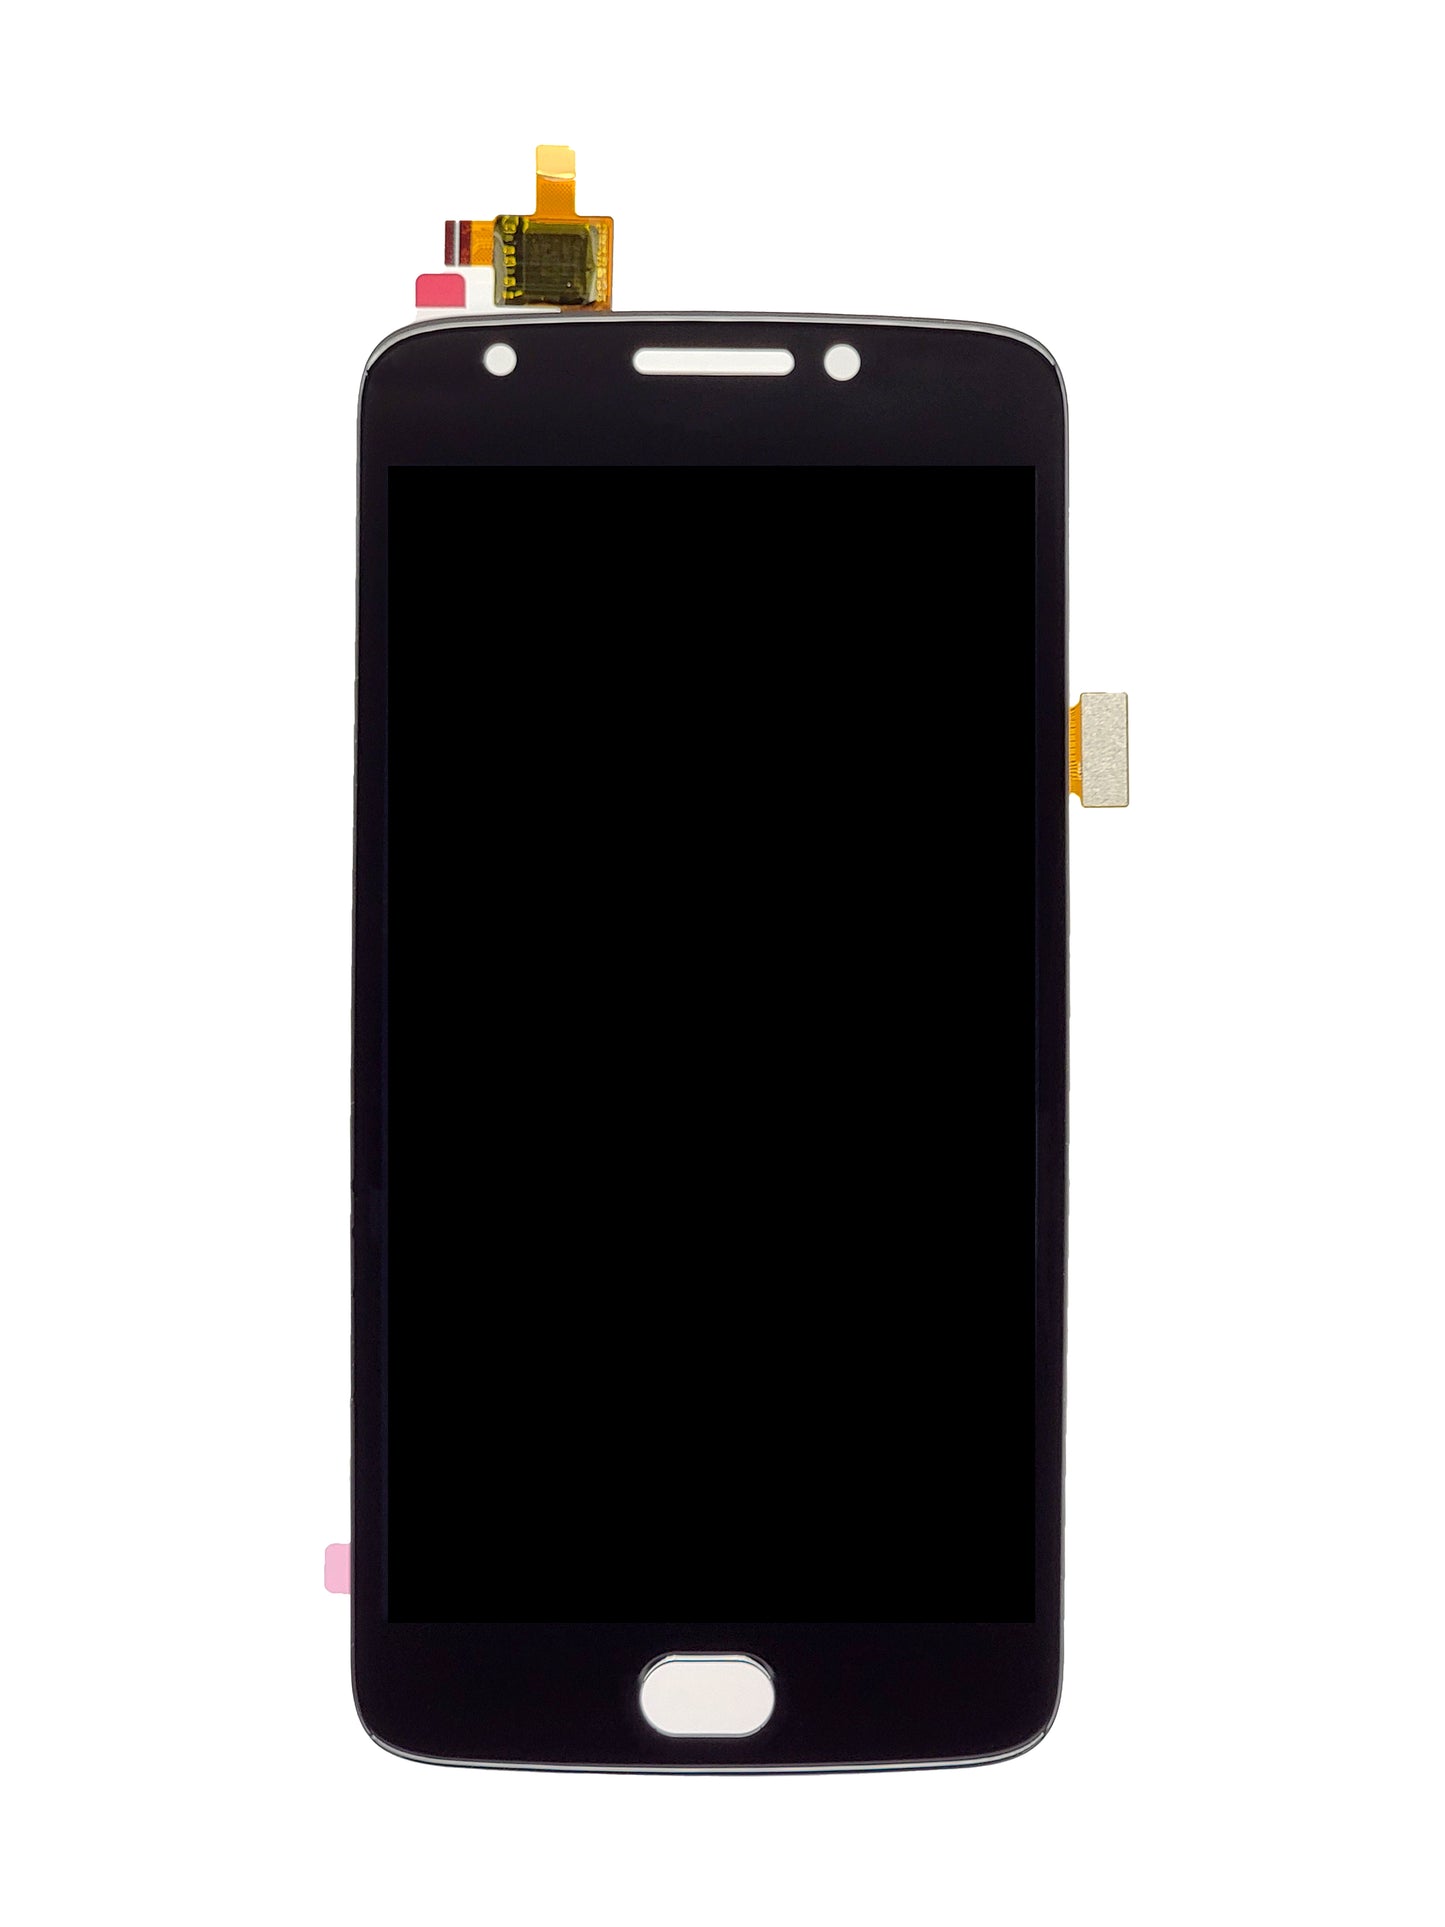 Moto E4 (XT1768) Screen Assembly (Without The Frame) (Refurbished) (Black)